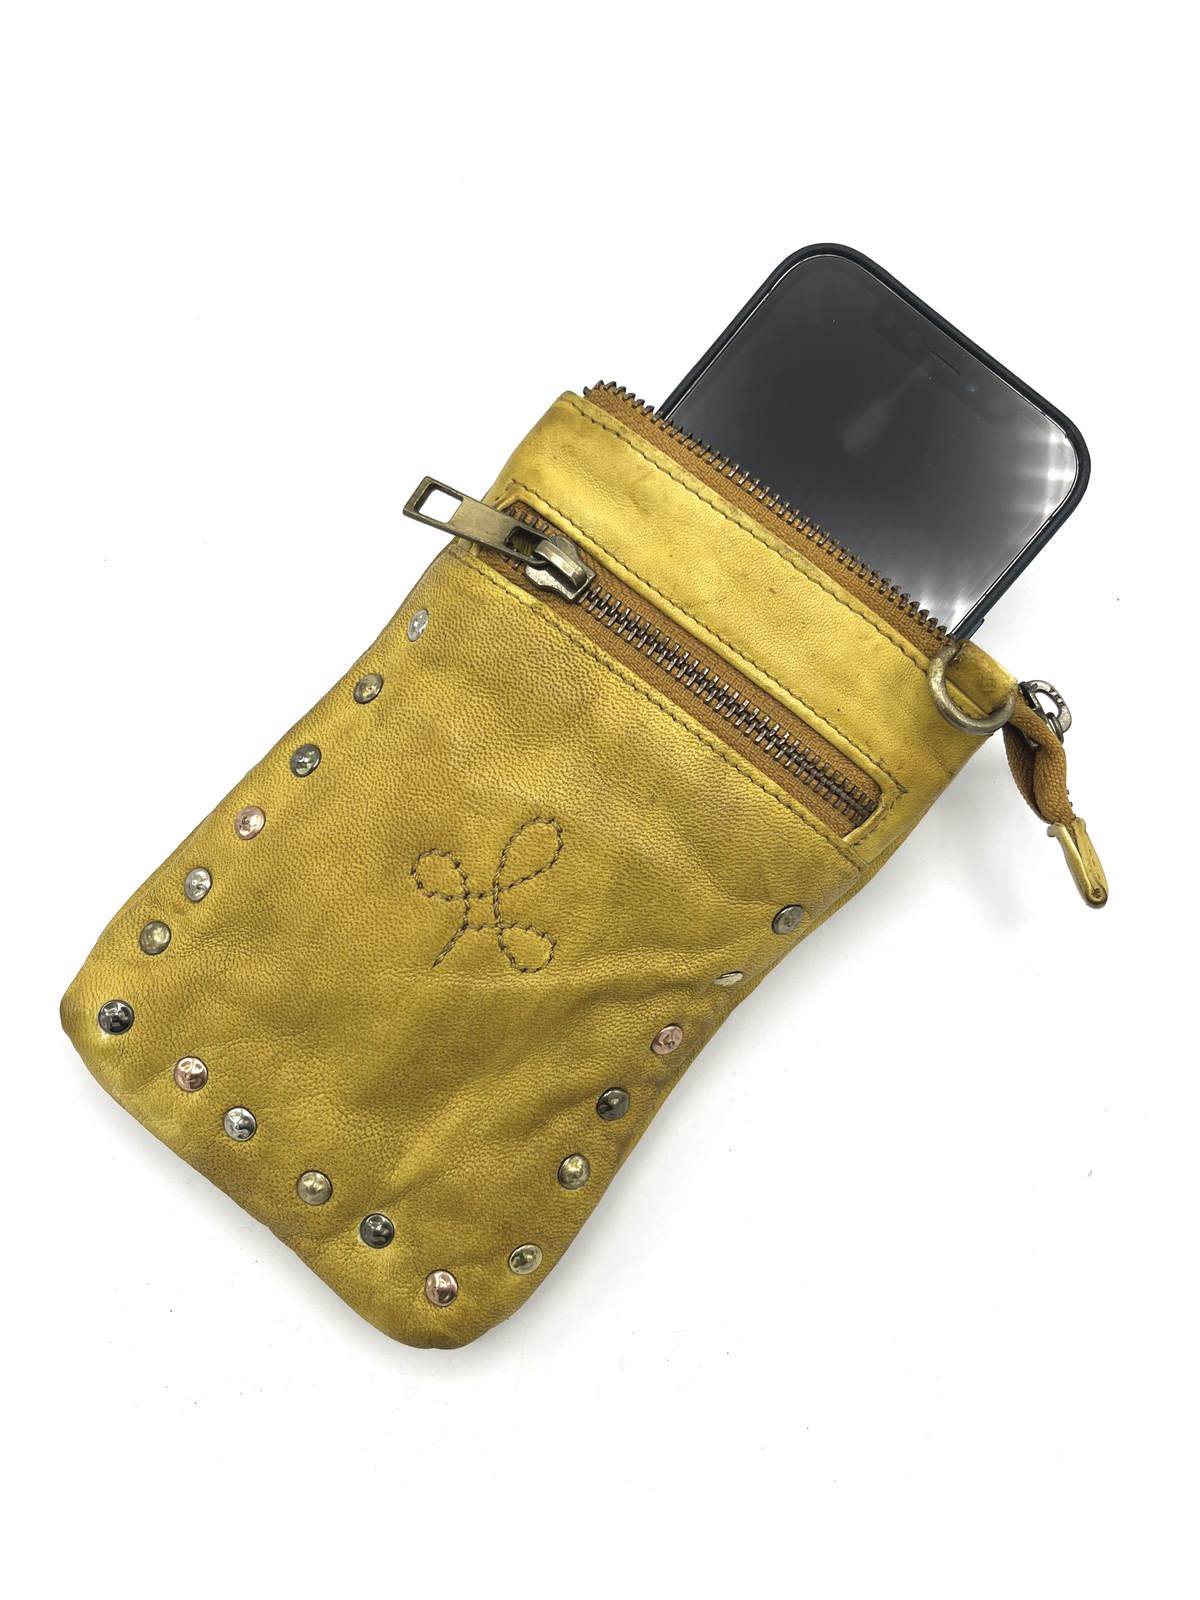 Phone case with strap in washed leather, Brand Juice, art. 052-JU02.422